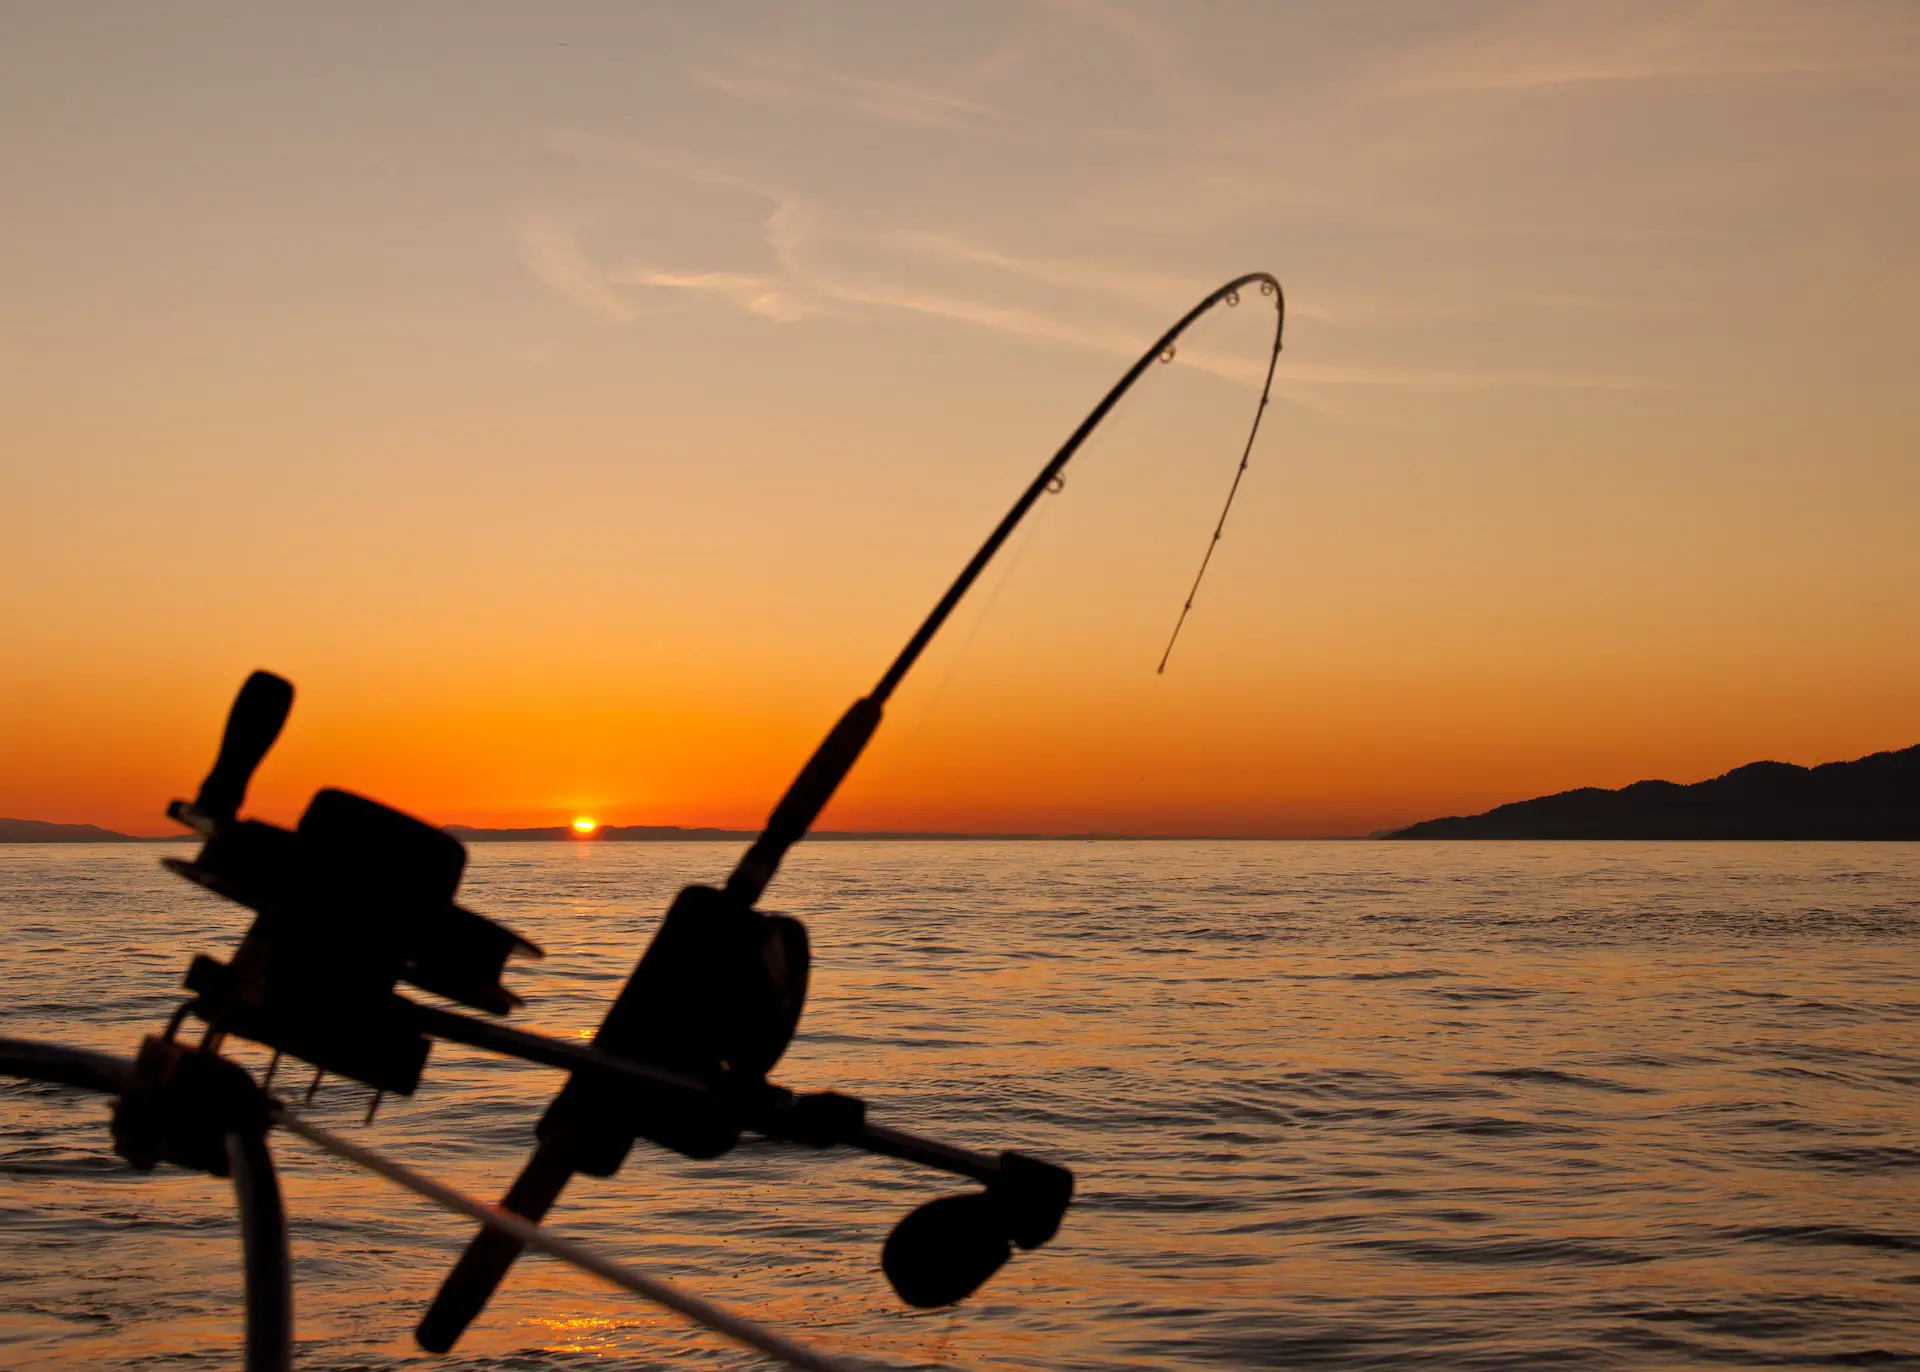 Saltwater sport fishing at sunset in Vancouver